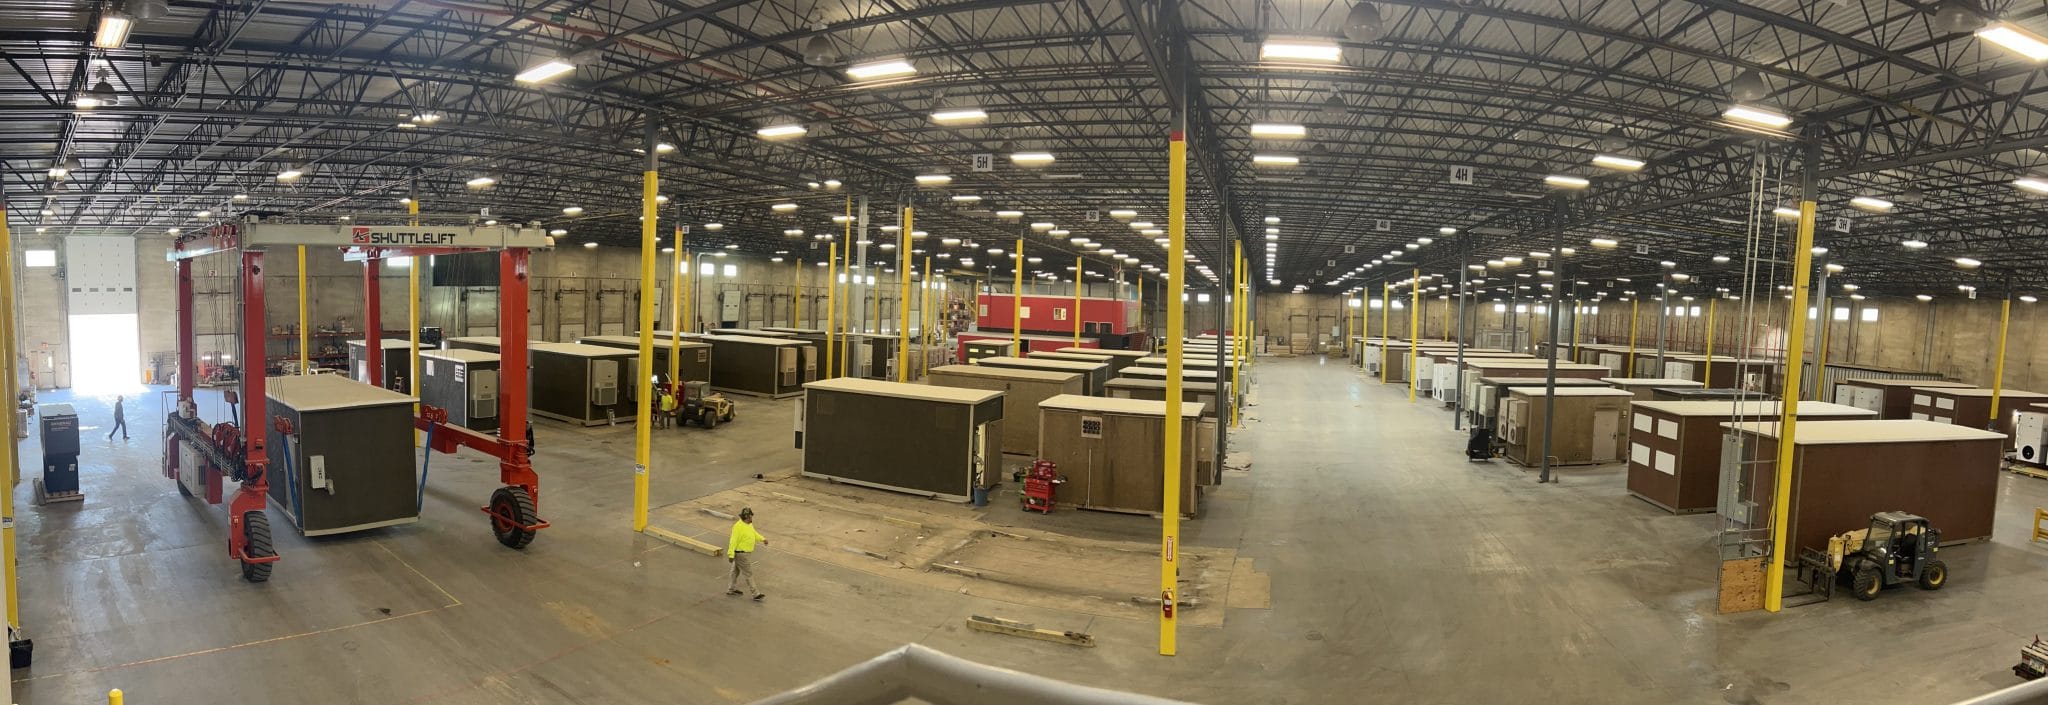 A panoramic view of the warehouse facility at CellSite Solutions where you can see concrete shelters arranged in aisles by the Shuttlelift crane.